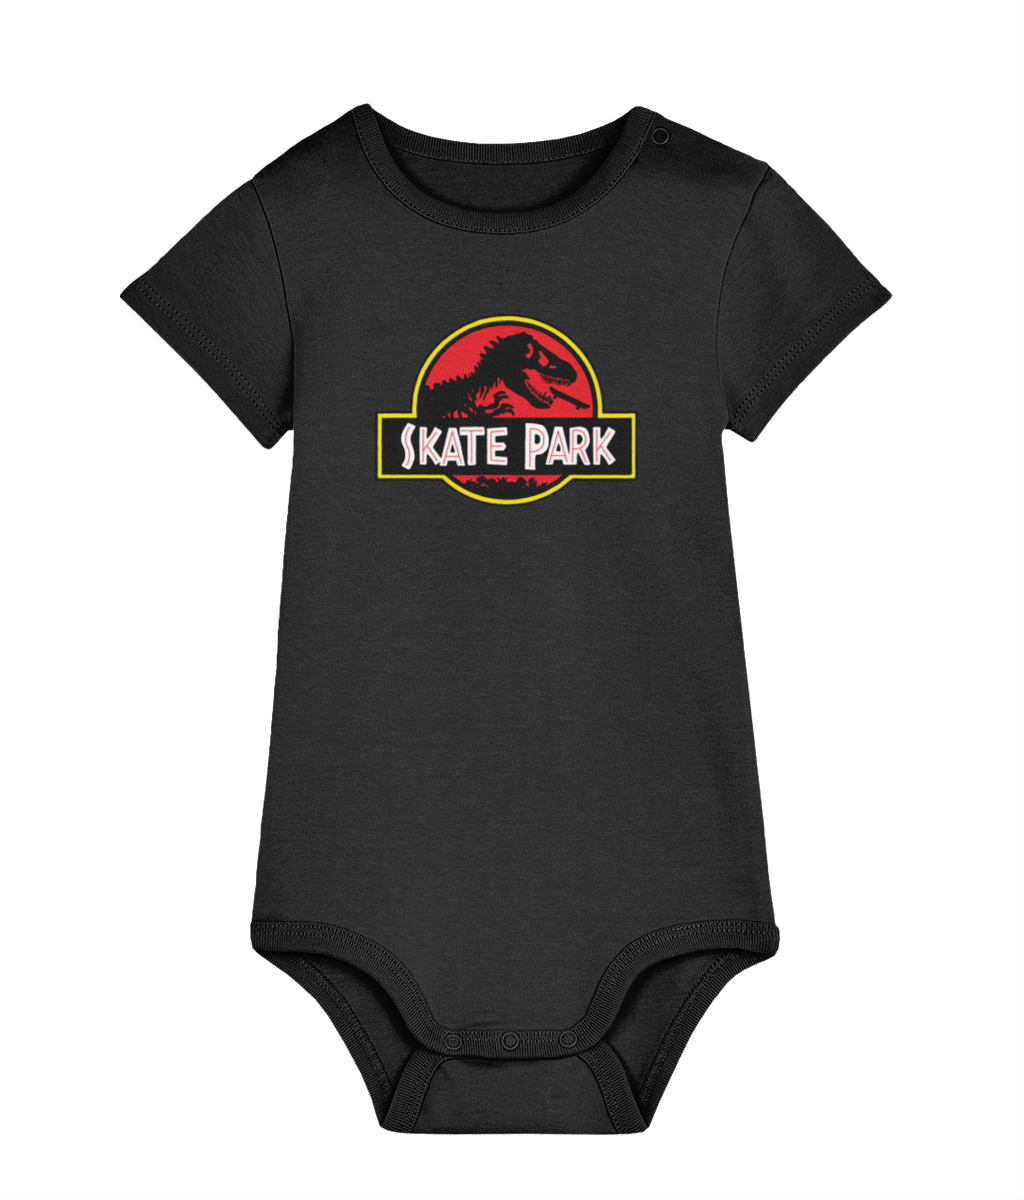 Skate Park Organic Cotton Body Suit - Super Soft!, perfect for that future Skate Boarder in the family!